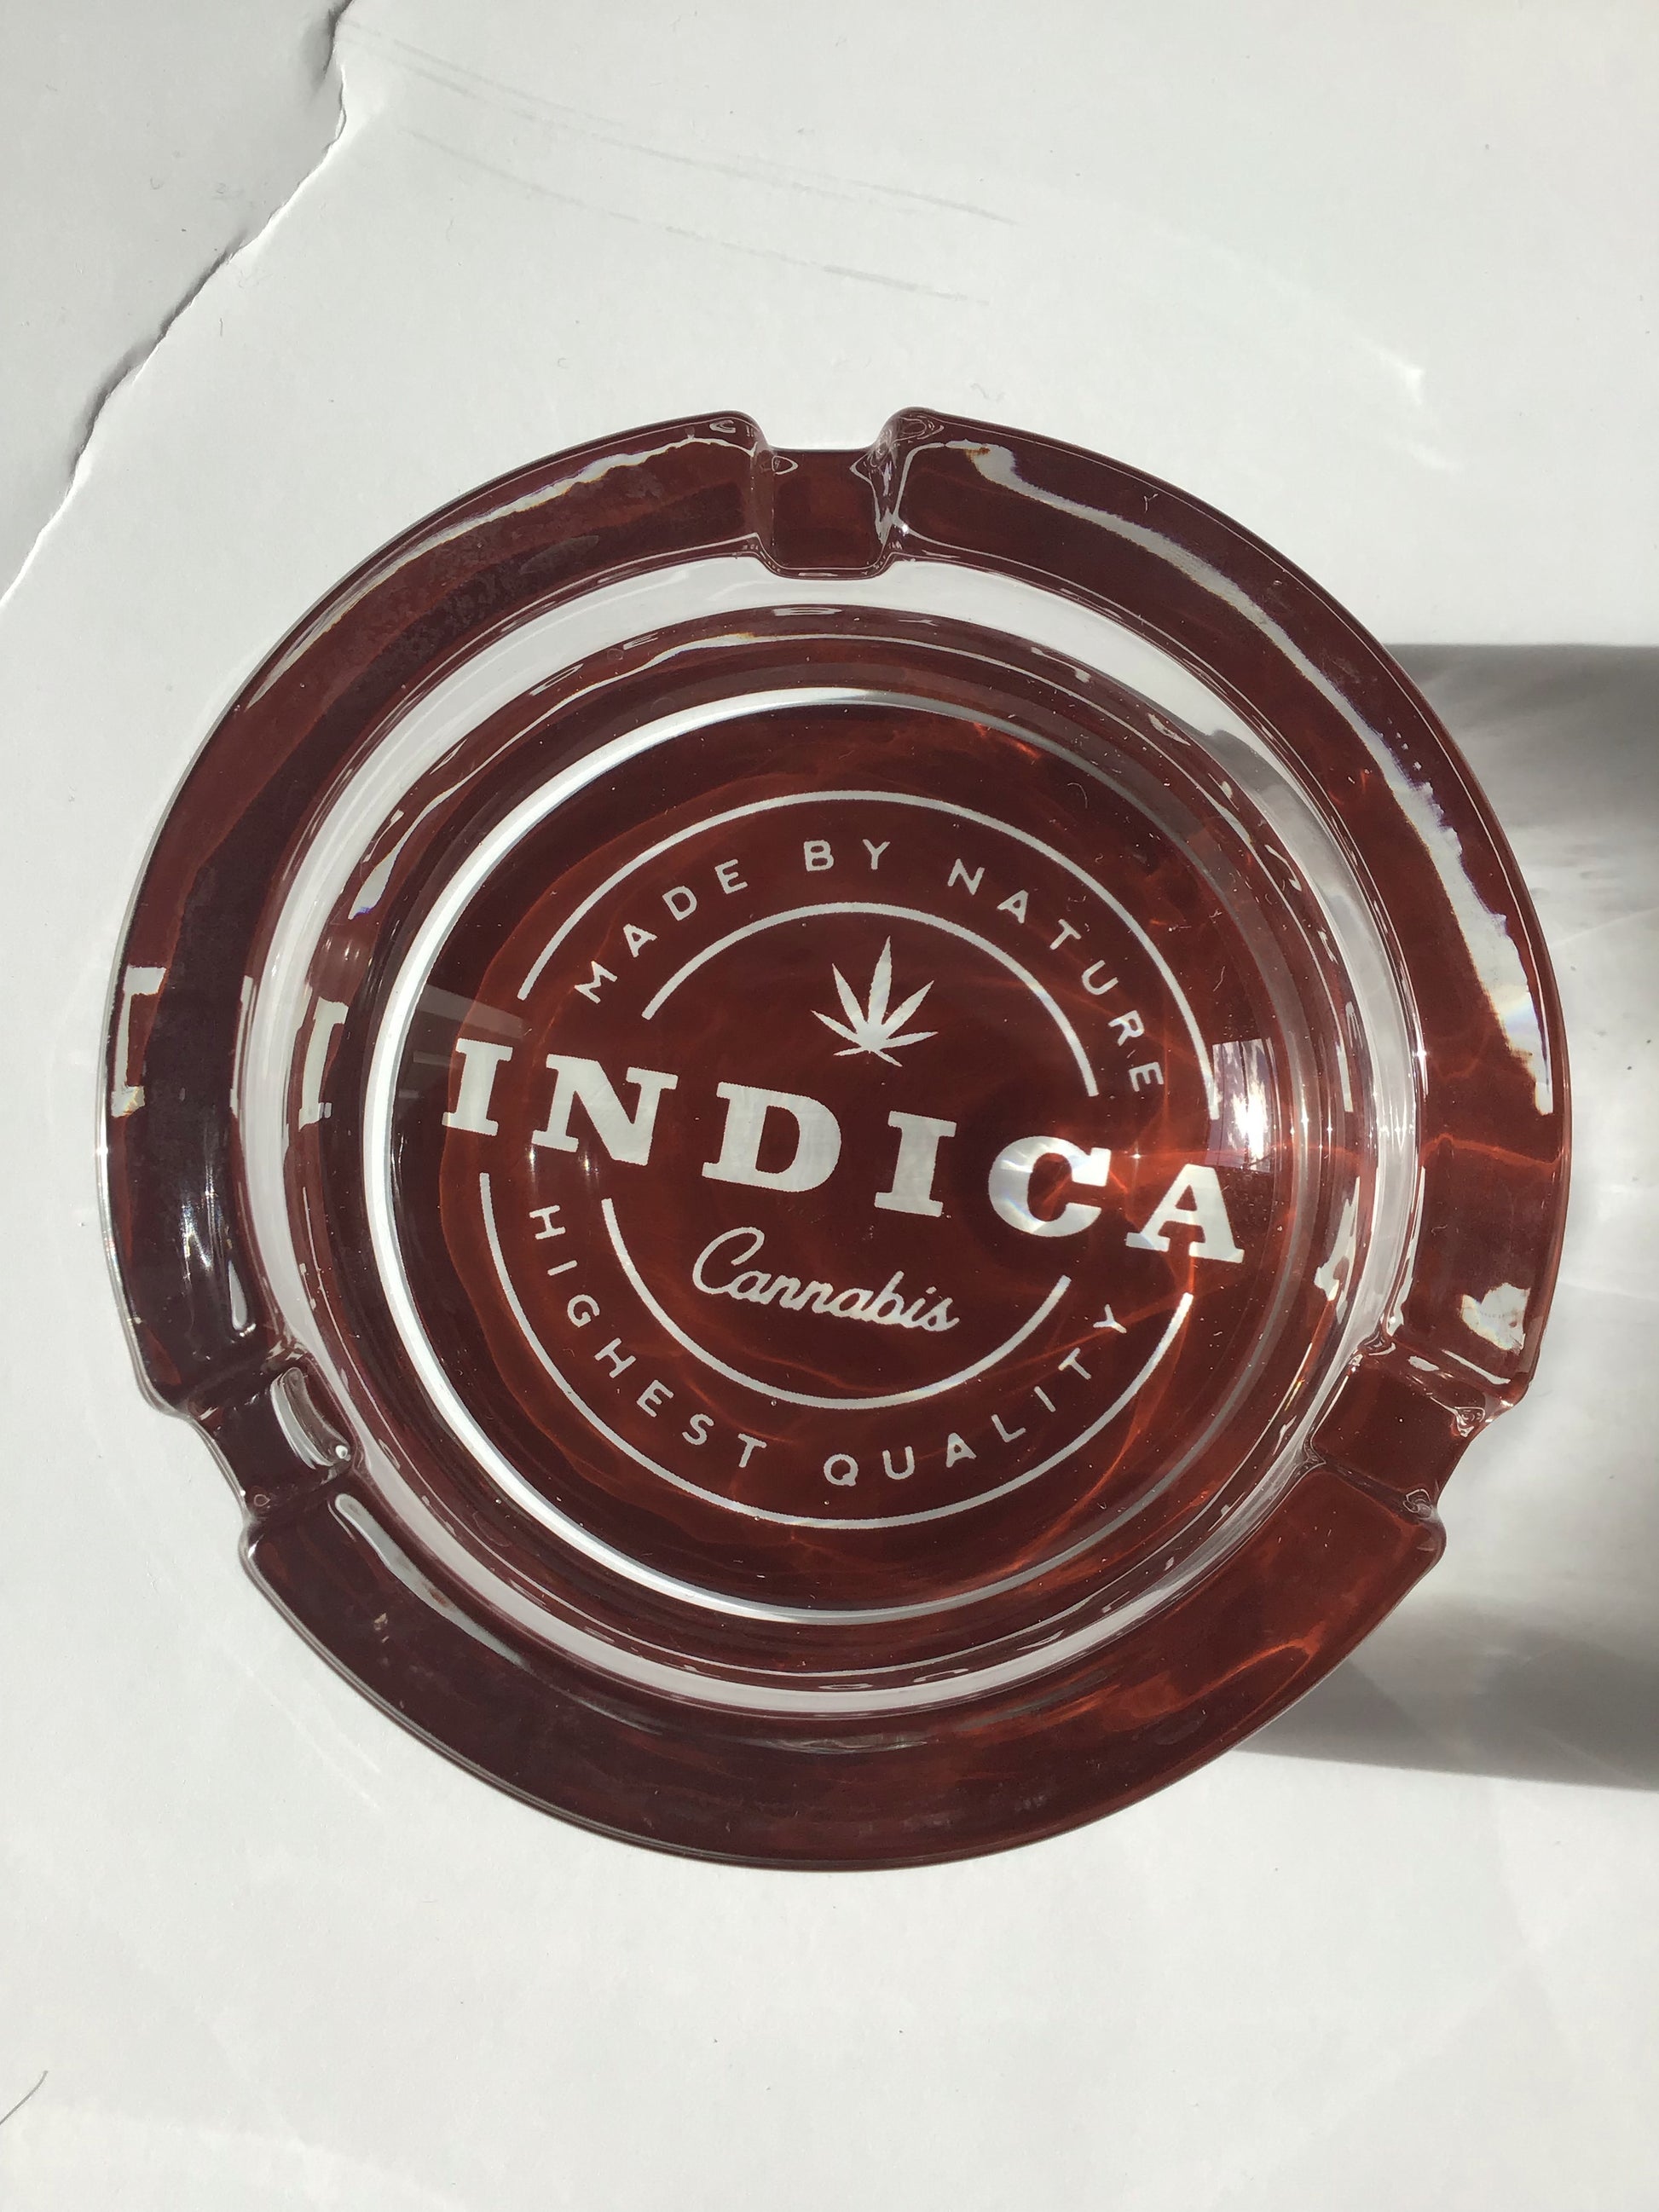 Indica Highest Quality Design Durable Glass Ashtray yoga smokes yoga studio, delivery, delivery near me, yoga smokes smoke shop, find smoke shop, head shop near me, yoga studio, headshop, head shop, local smoke shop, psl, psl smoke shop, smoke shop, smokeshop, yoga, yoga studio, dispensary, local dispensary, smokeshop near me, port saint lucie, florida, port st lucie, lounge, life, highlife, love, stoned, highsociety. Yoga Smokes